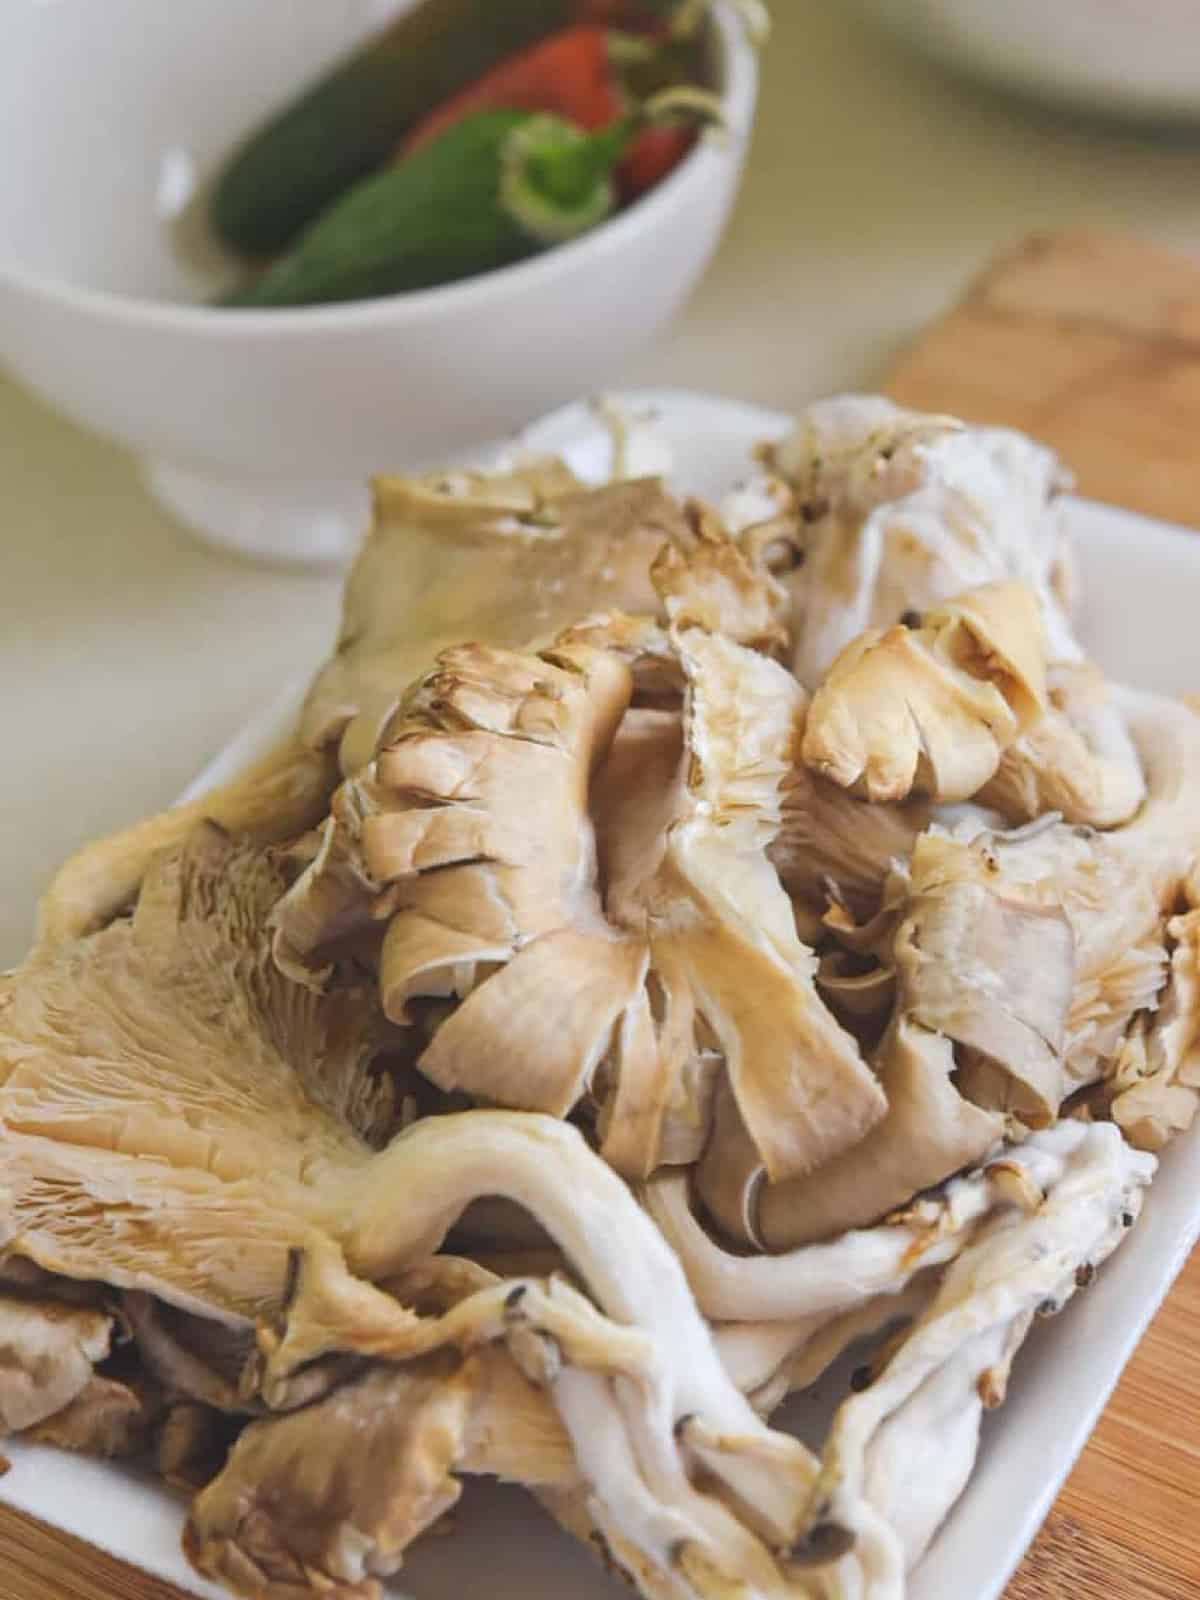 cooking oyster mushrooms